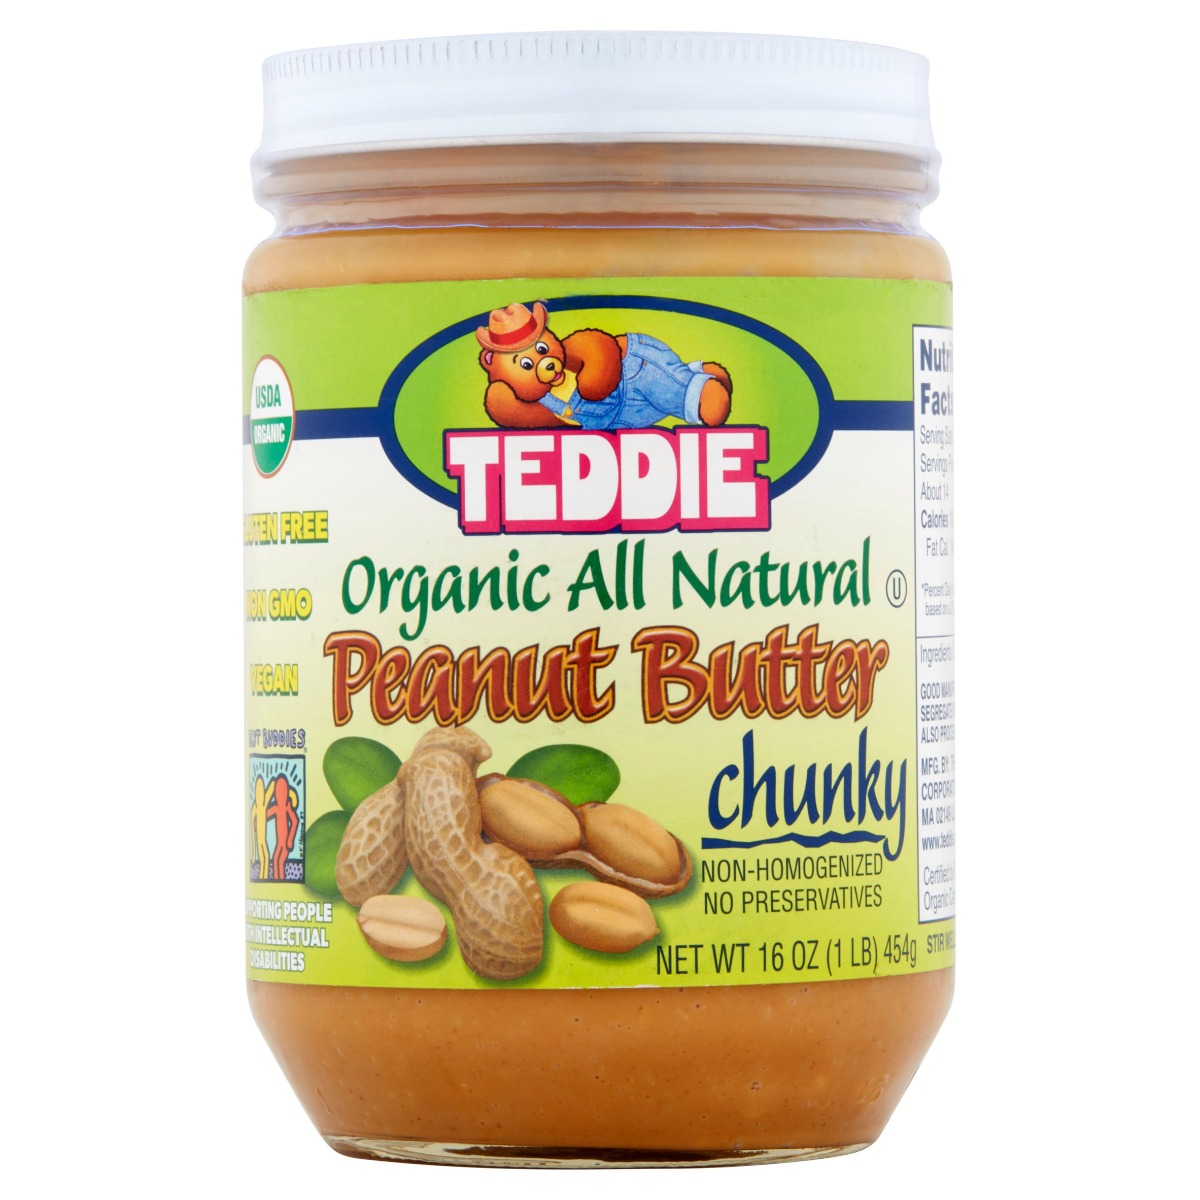 Organic All Natural Peanut Butter Chunky - 071018010763